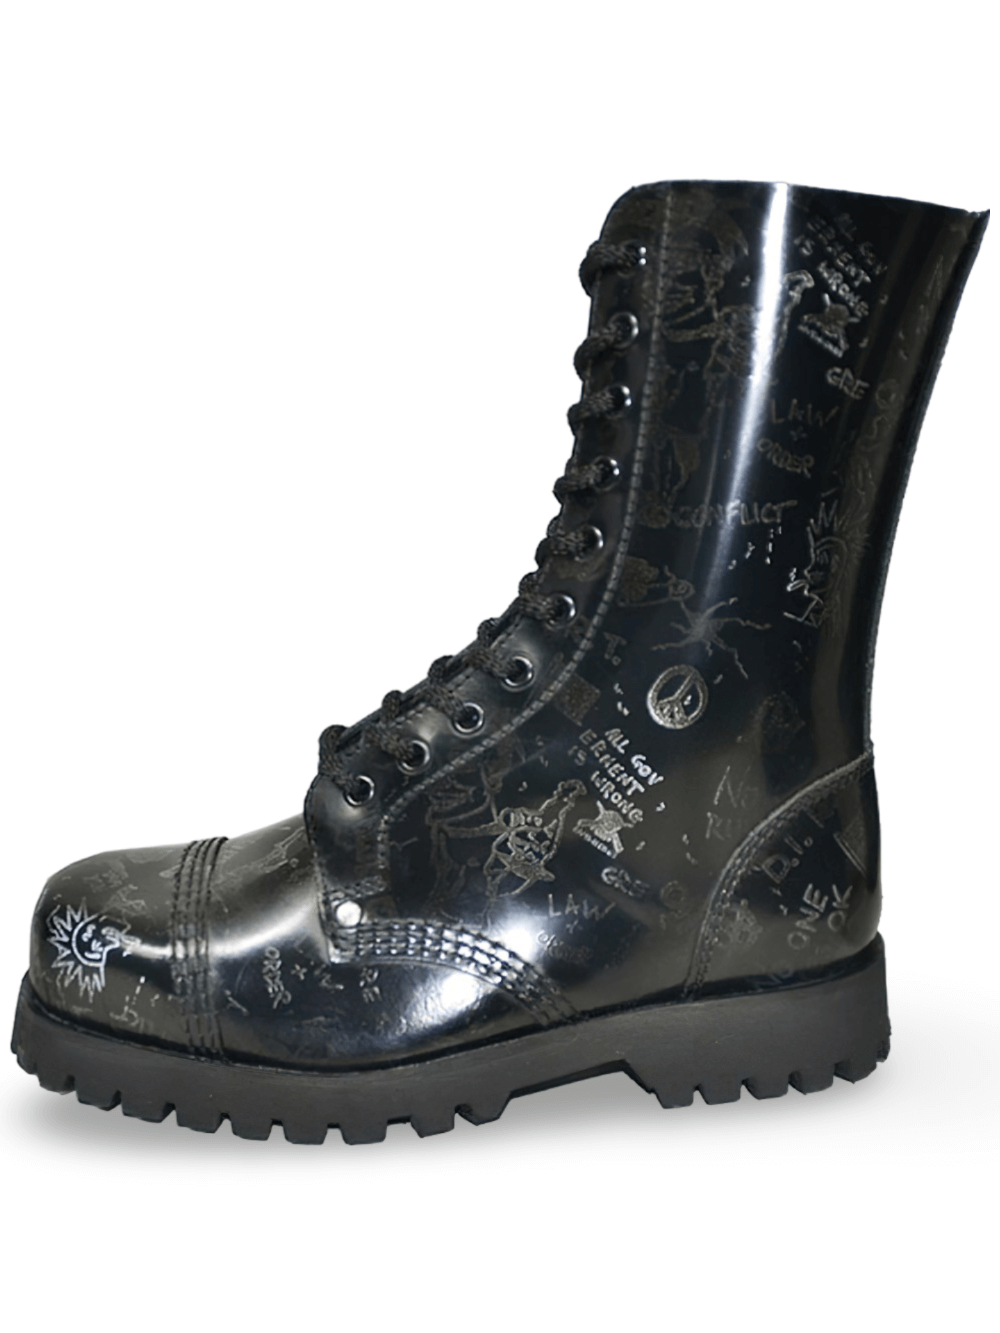 Unisex 10-Eyelet Rangers Boots with Steel Toe